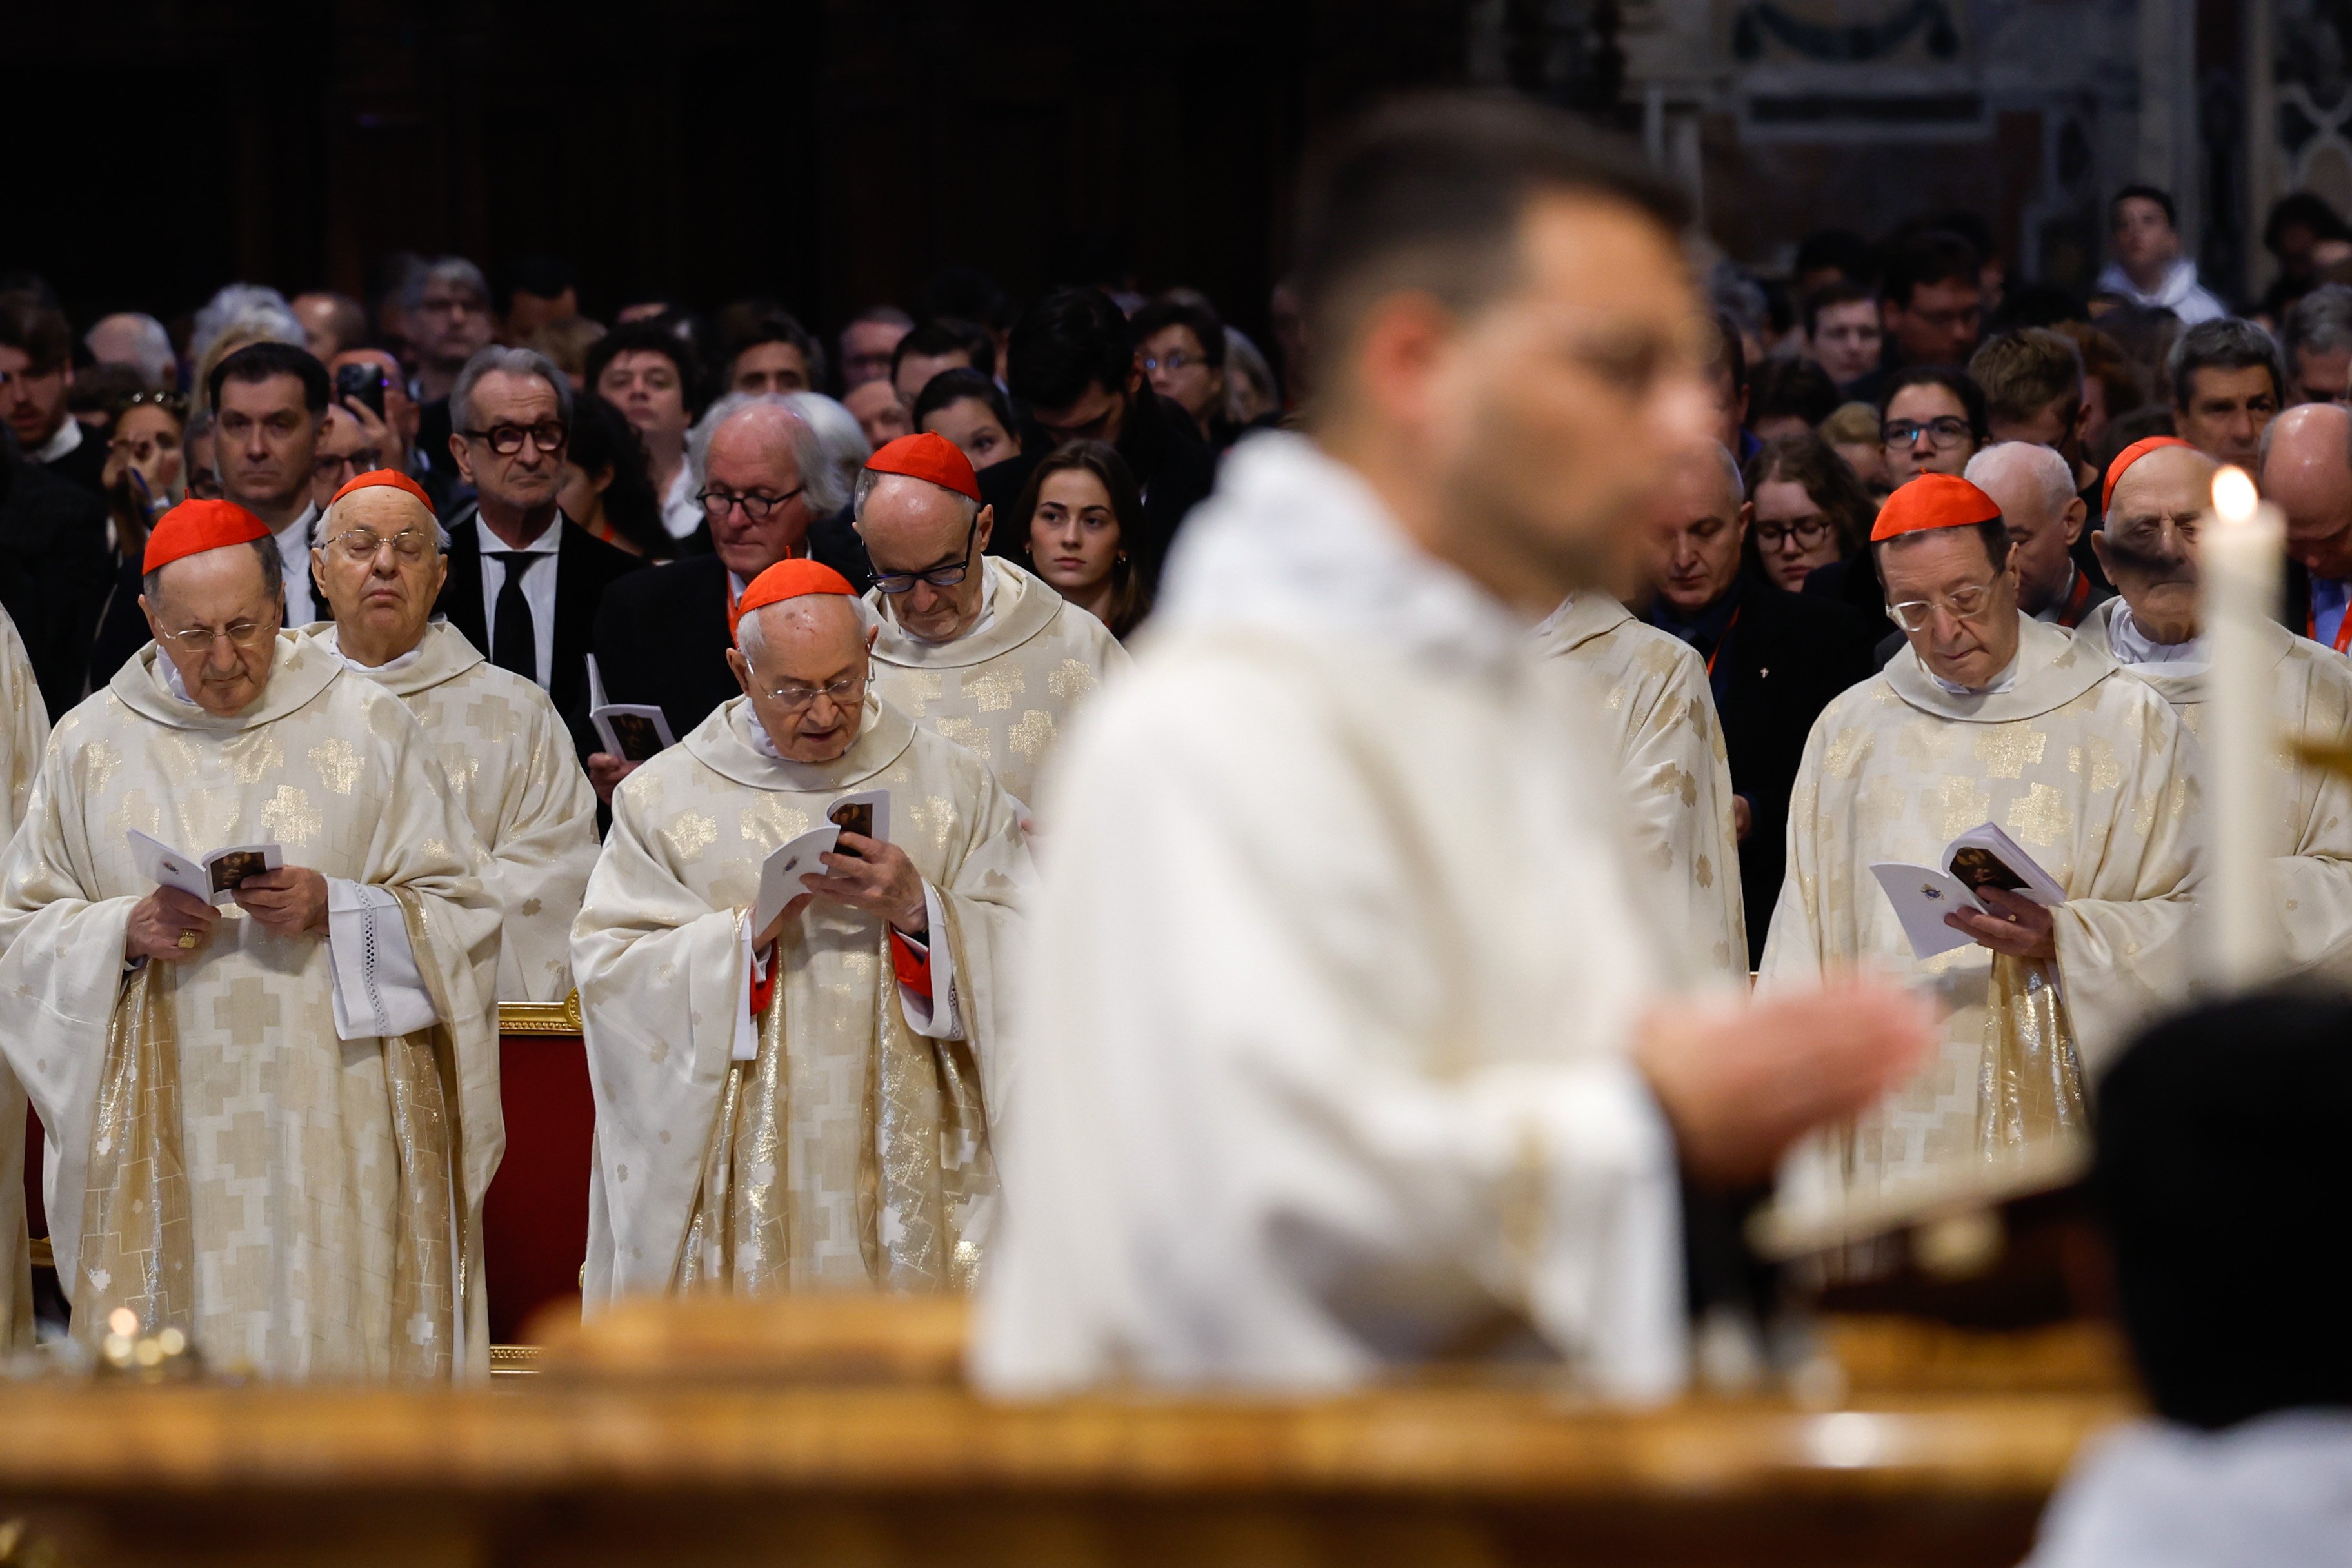 Cardinals pray as the Gospel is read during Pope Francis' Mass.